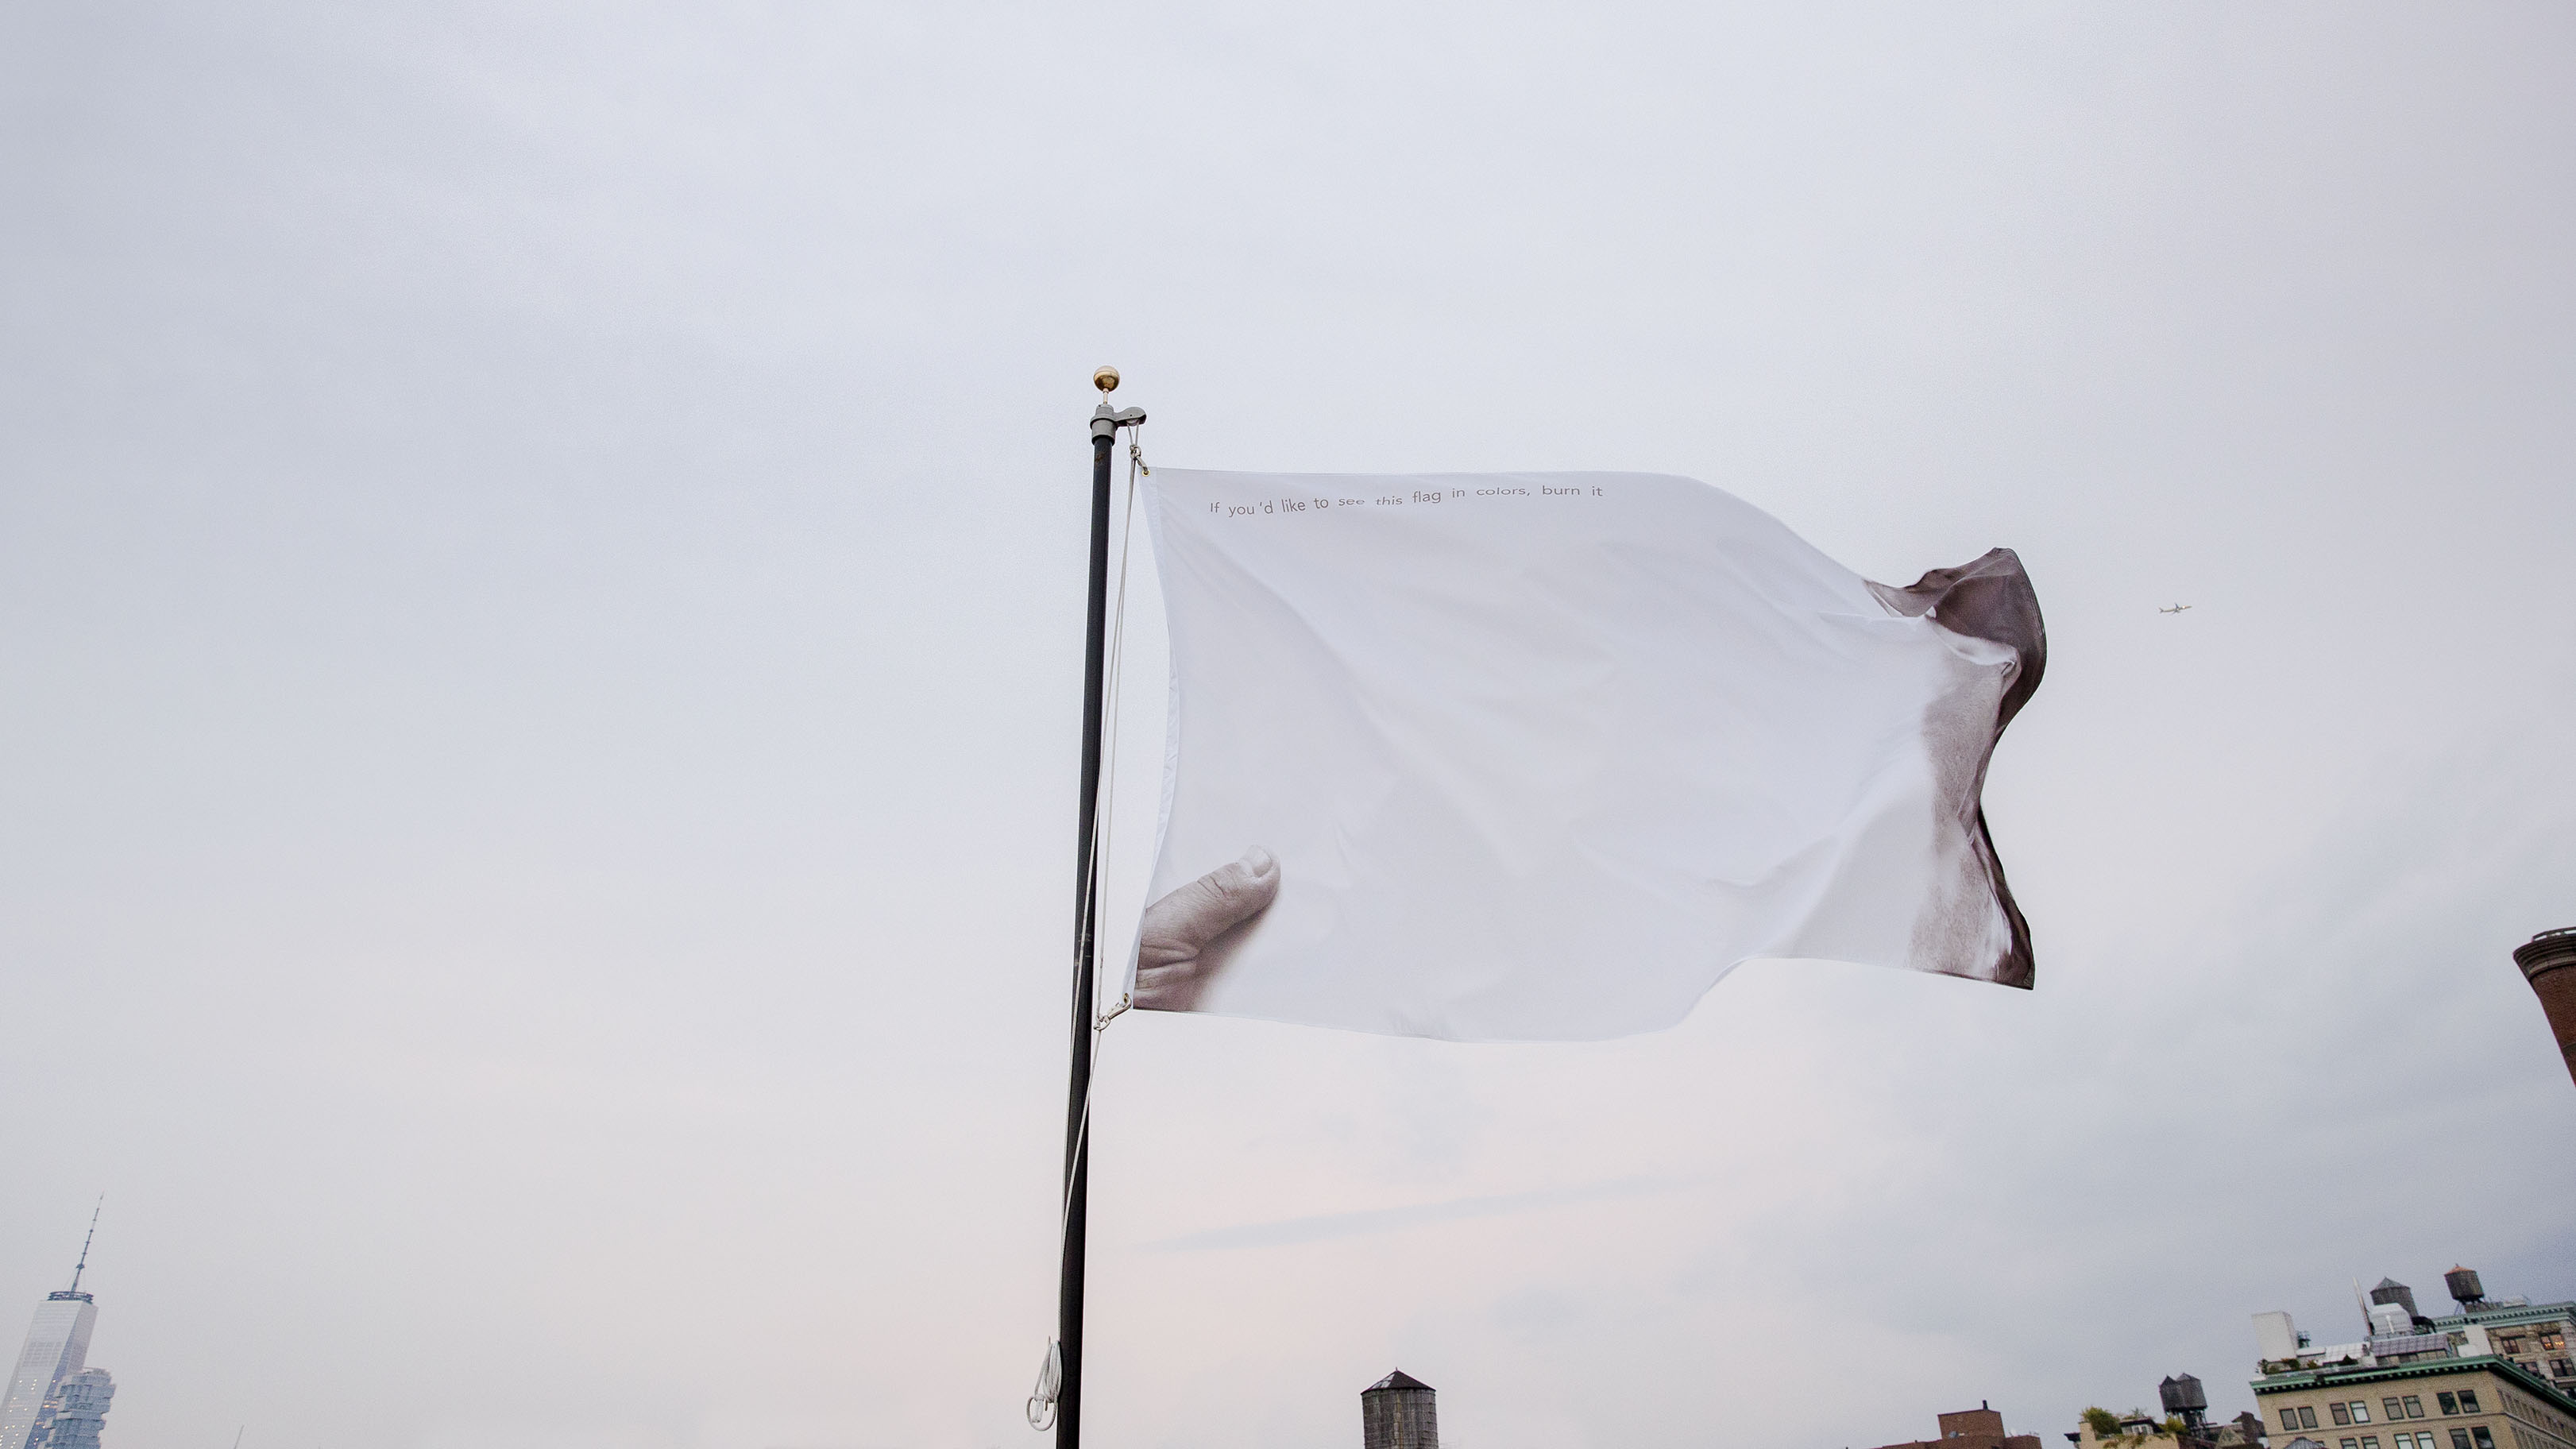 A white flag flying in a gray sky. The flag has a thumb illustrated in the bottom left corner. The small text spans across the top of the flag and reads: “If you’d like to see this flag in colors, burn it.”